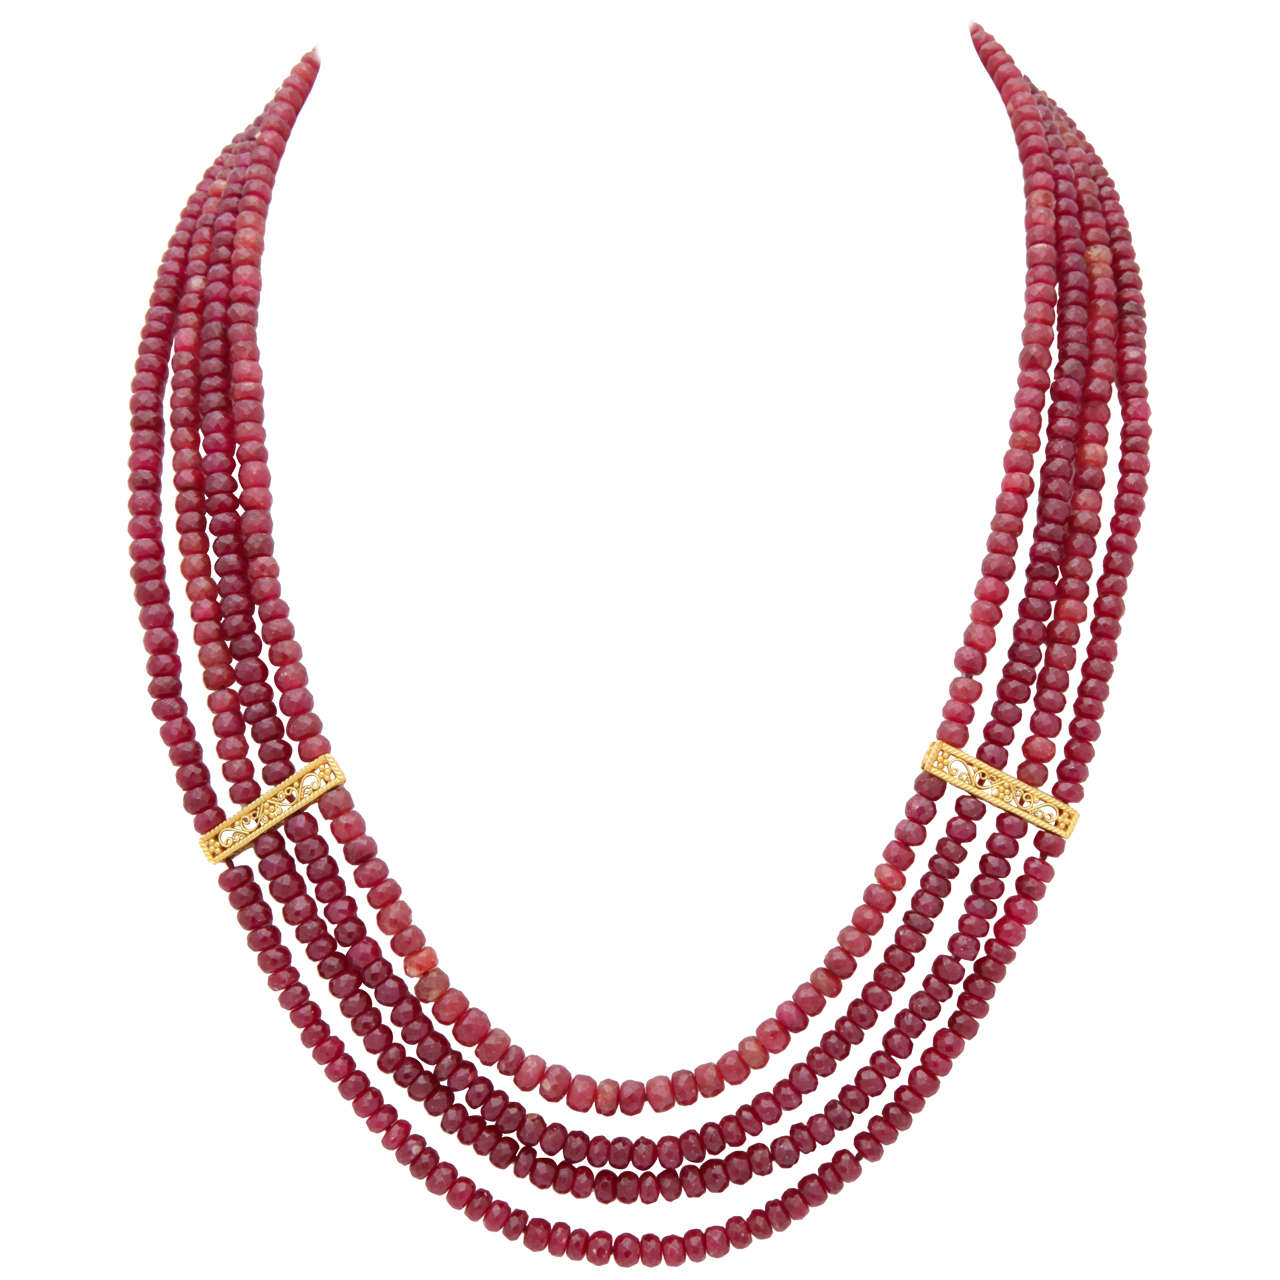 Stunning Ruby Bead Necklace For Sale